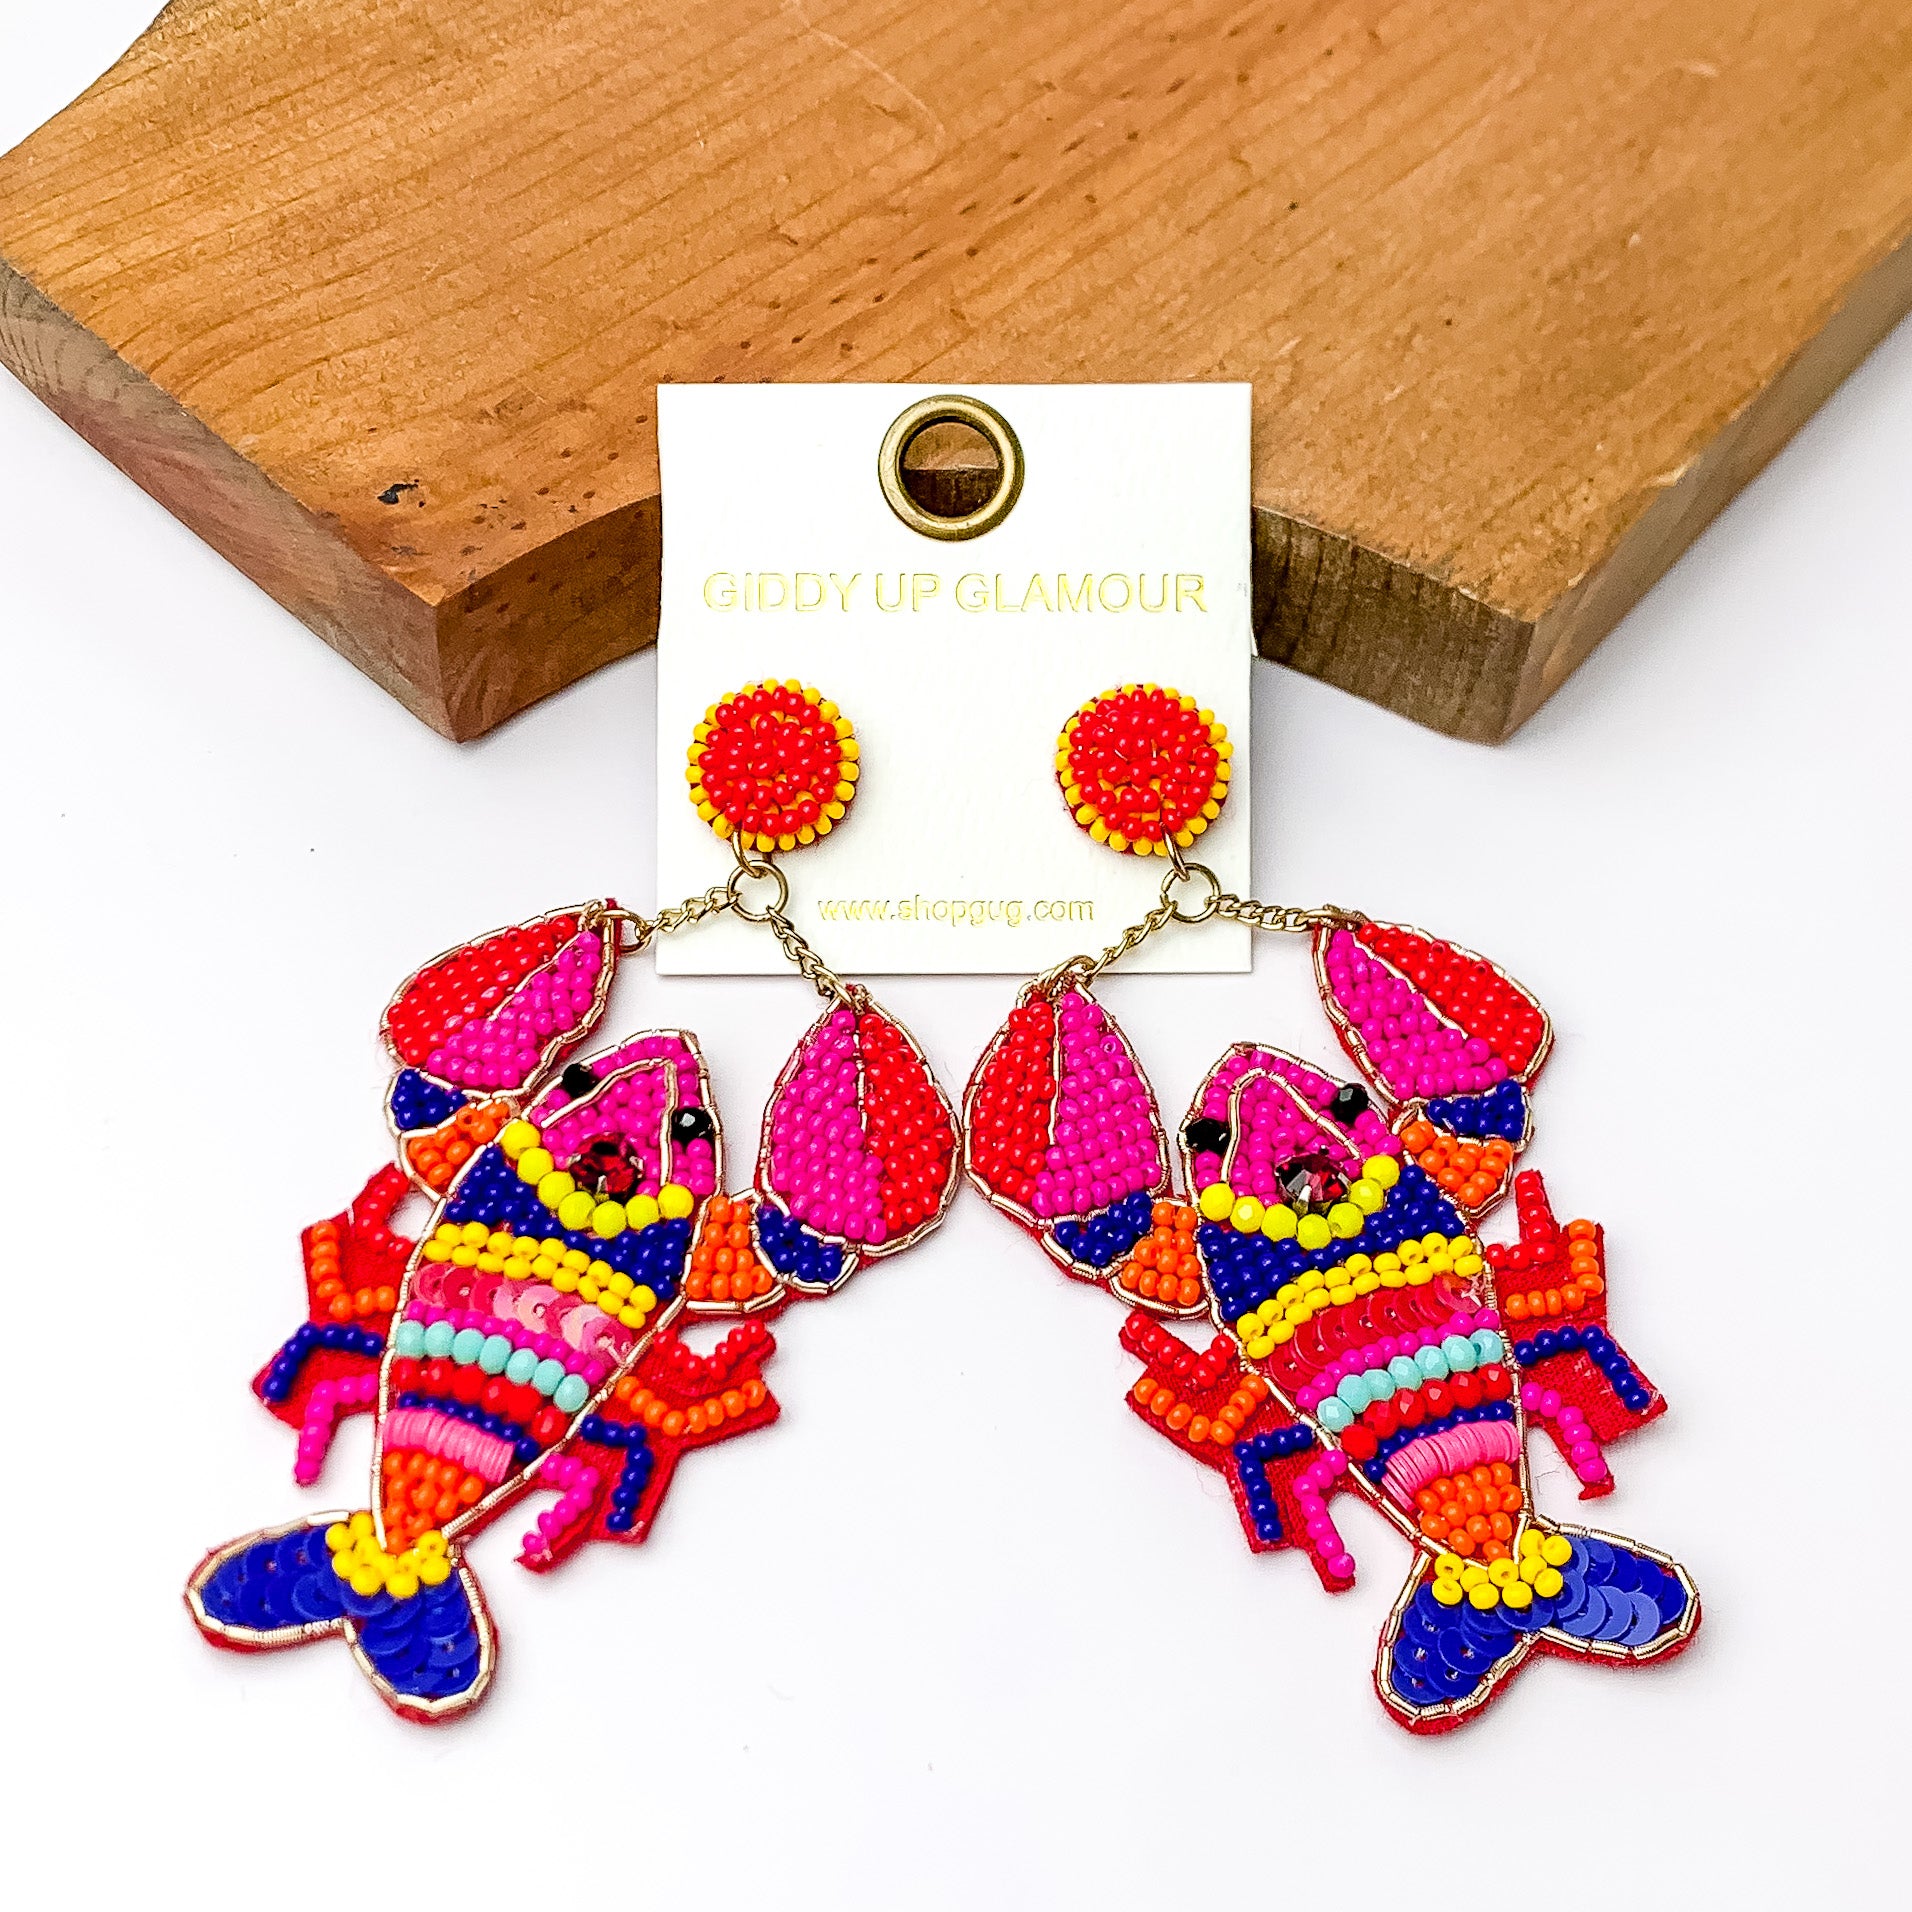 Pictured are beaded lobster earrings with multi beaded colors with gold outline detailing. These earrings are propped up on a piece of wood with a white background.